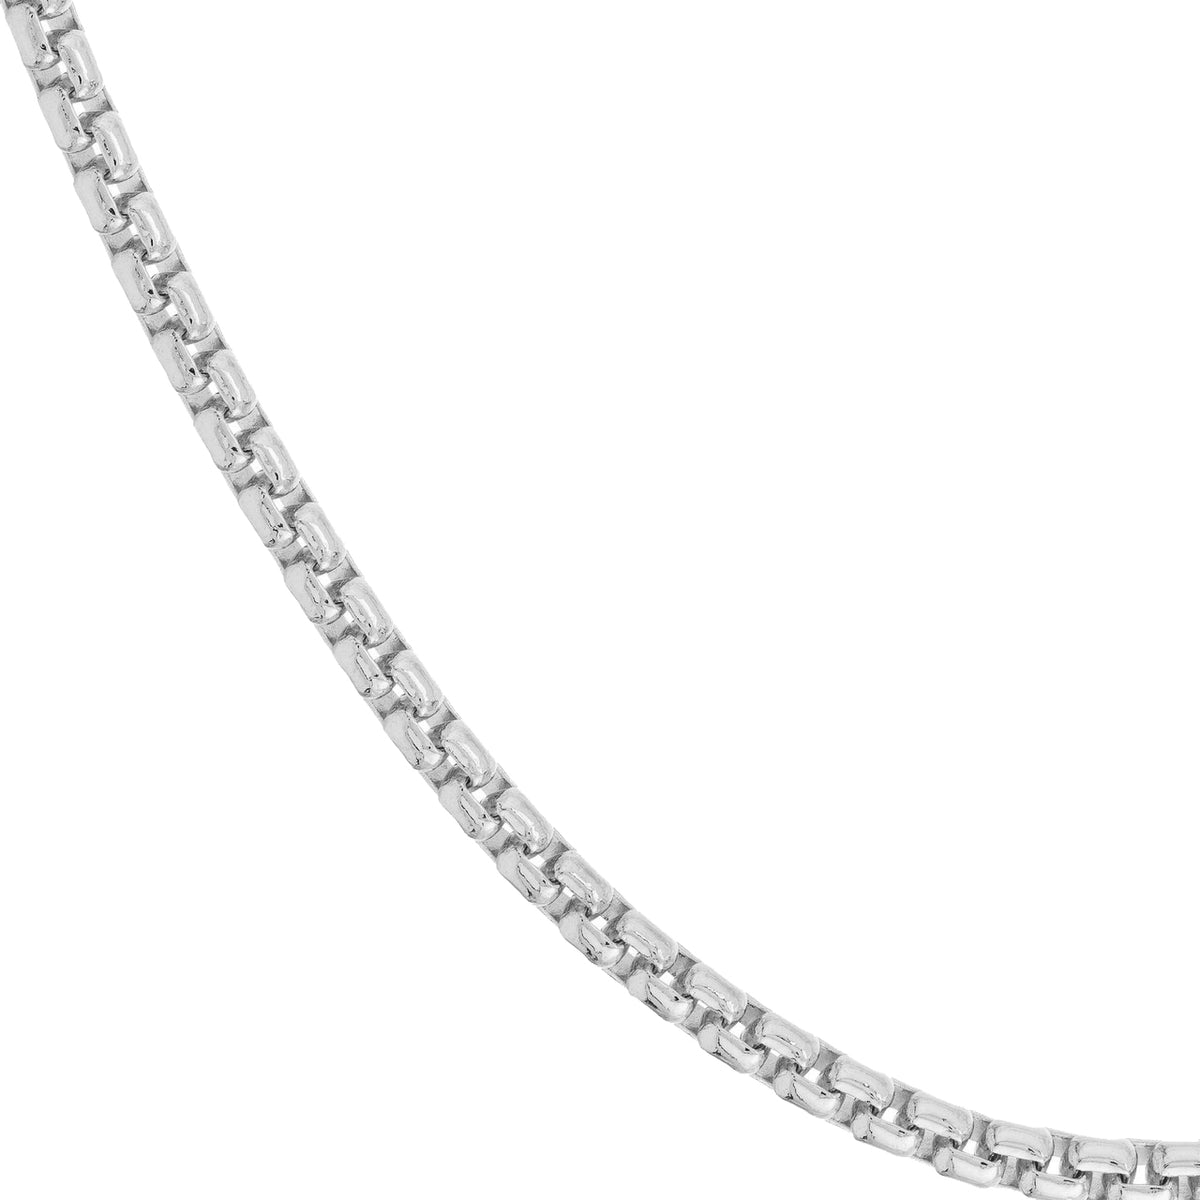 Solid 14k White Gold 4mm Round Box Chain Necklace with Lobster Lock